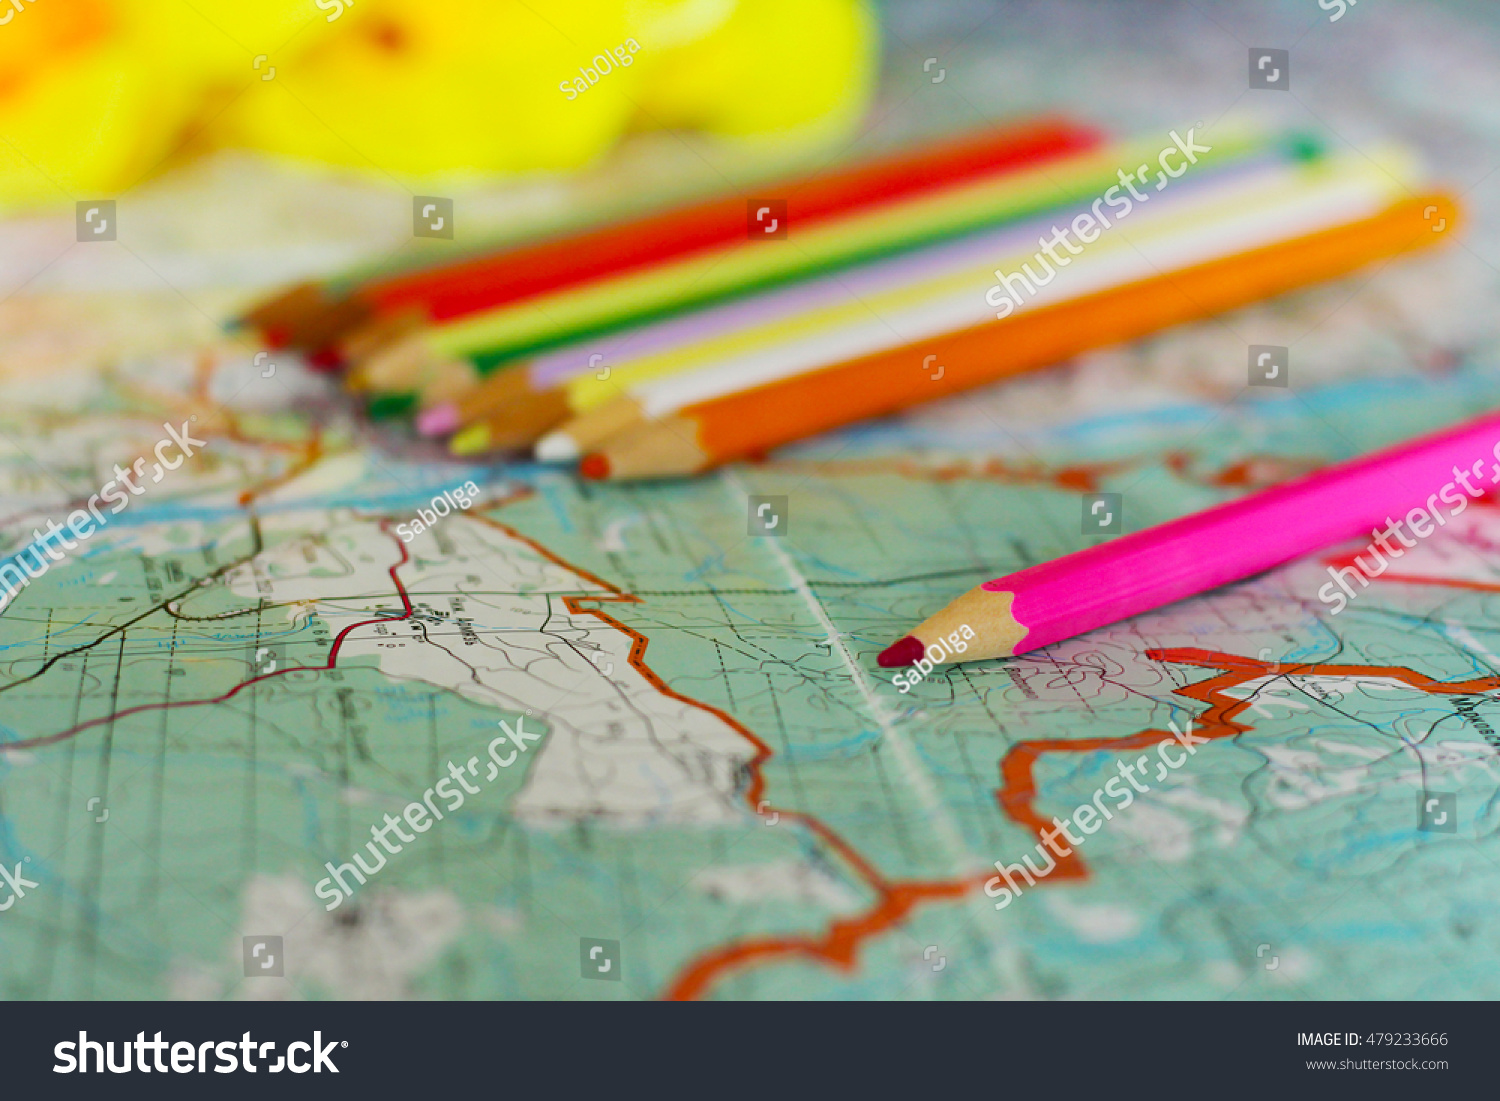 Colored Pencils On Map Stock Photo Edit Now 479233666